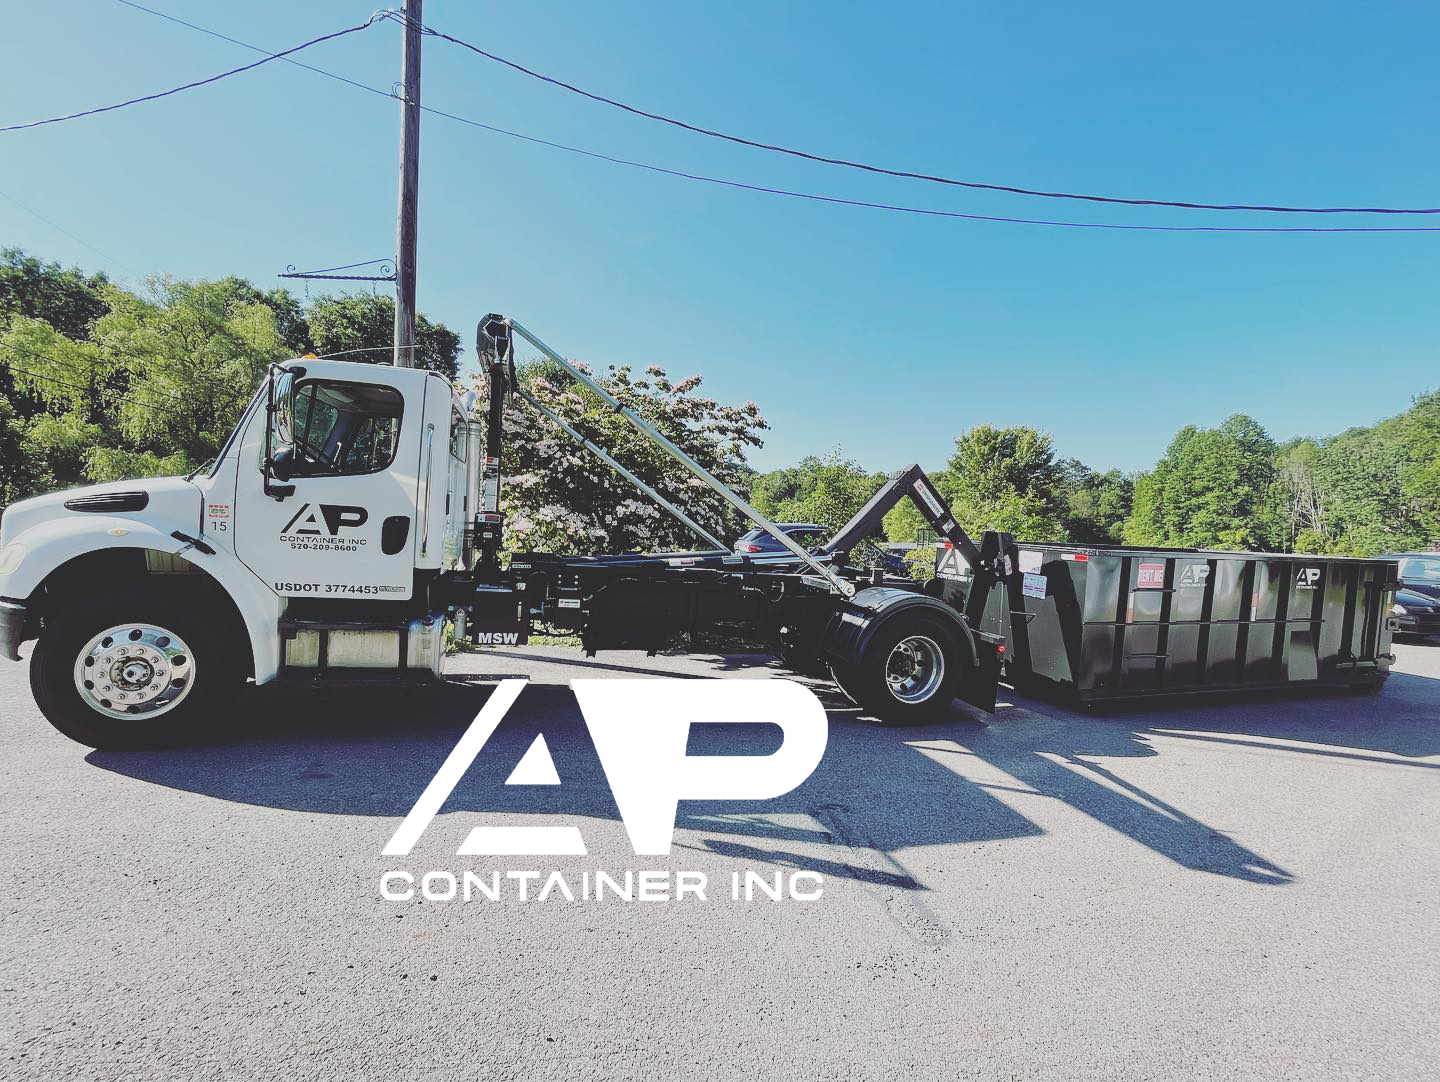 Construction Dumpster Rental AP Container Archbald PA